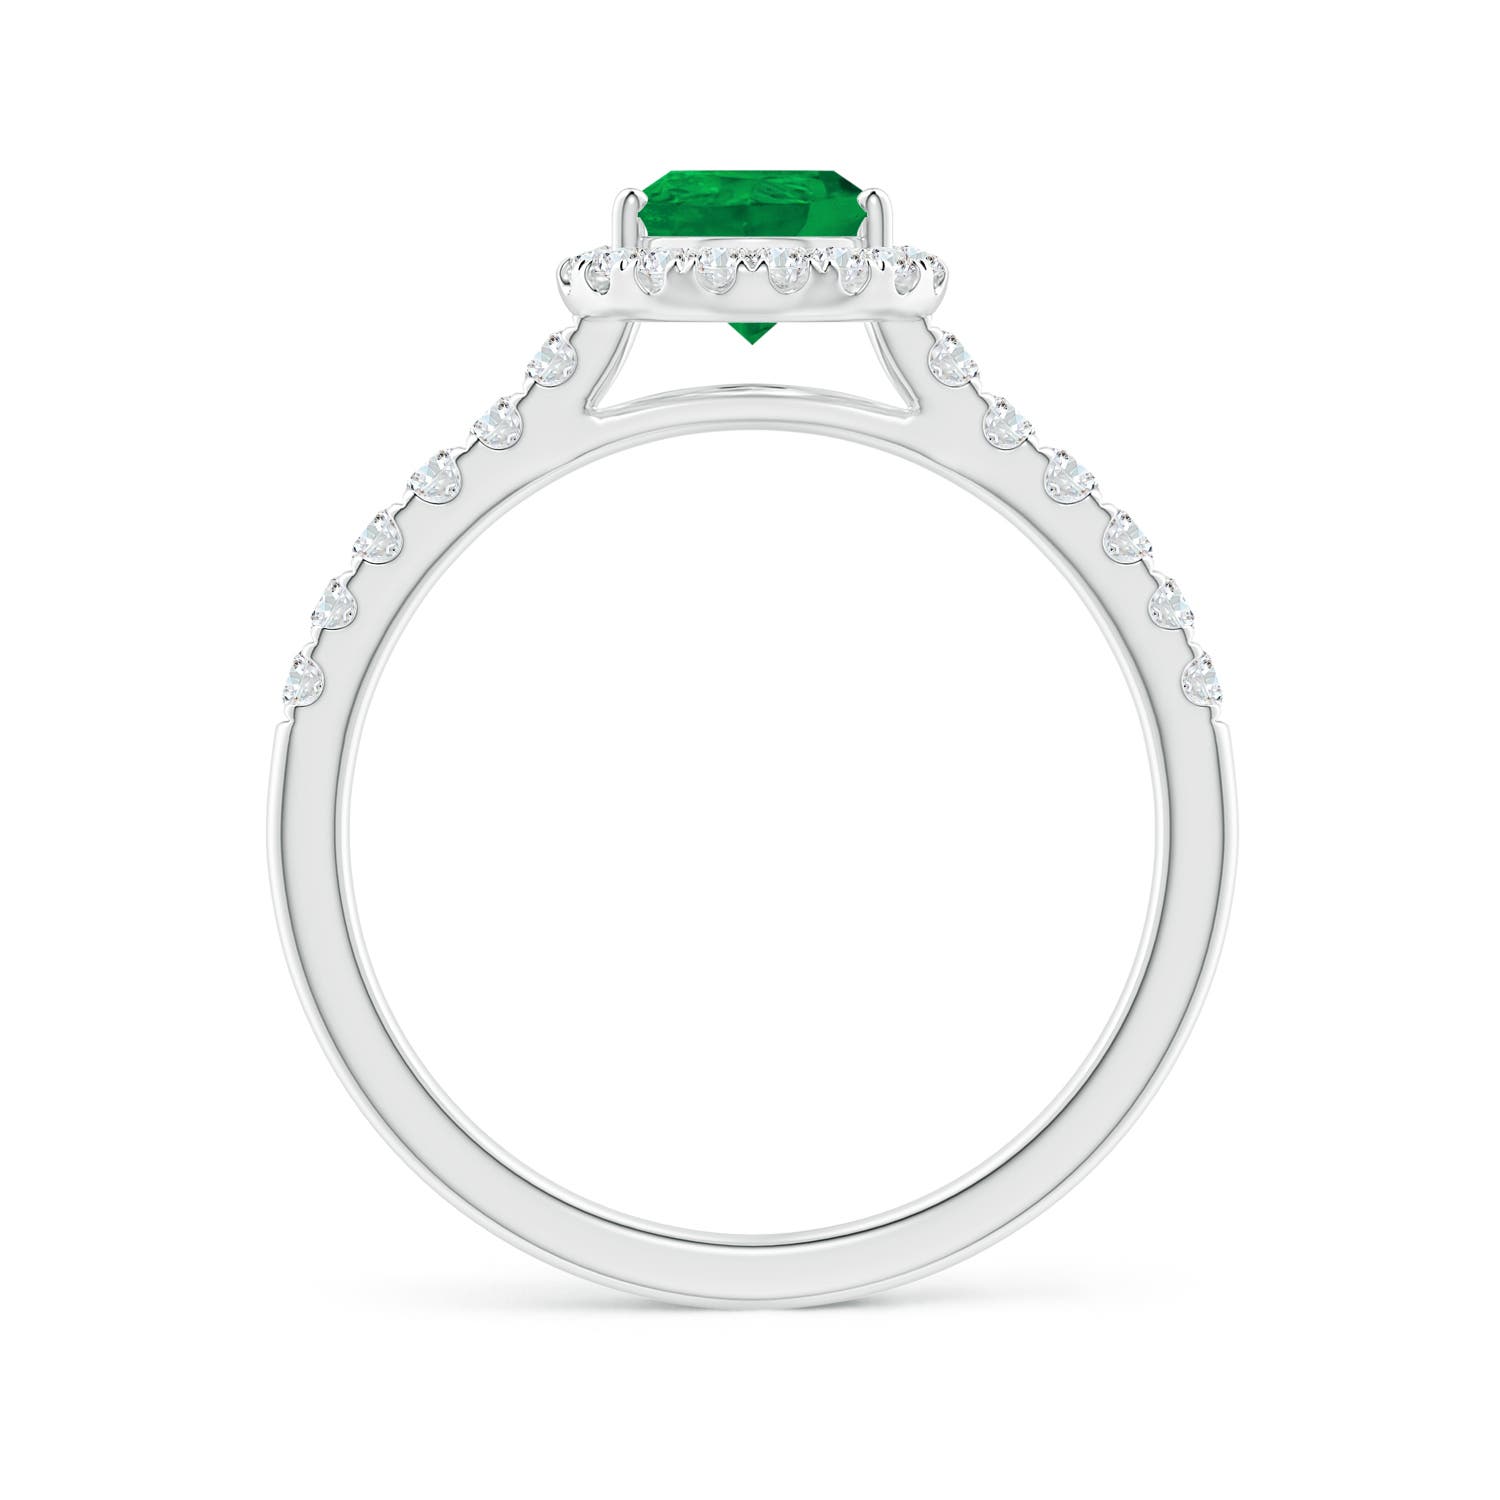 AA - Emerald / 1.32 CT / 14 KT White Gold